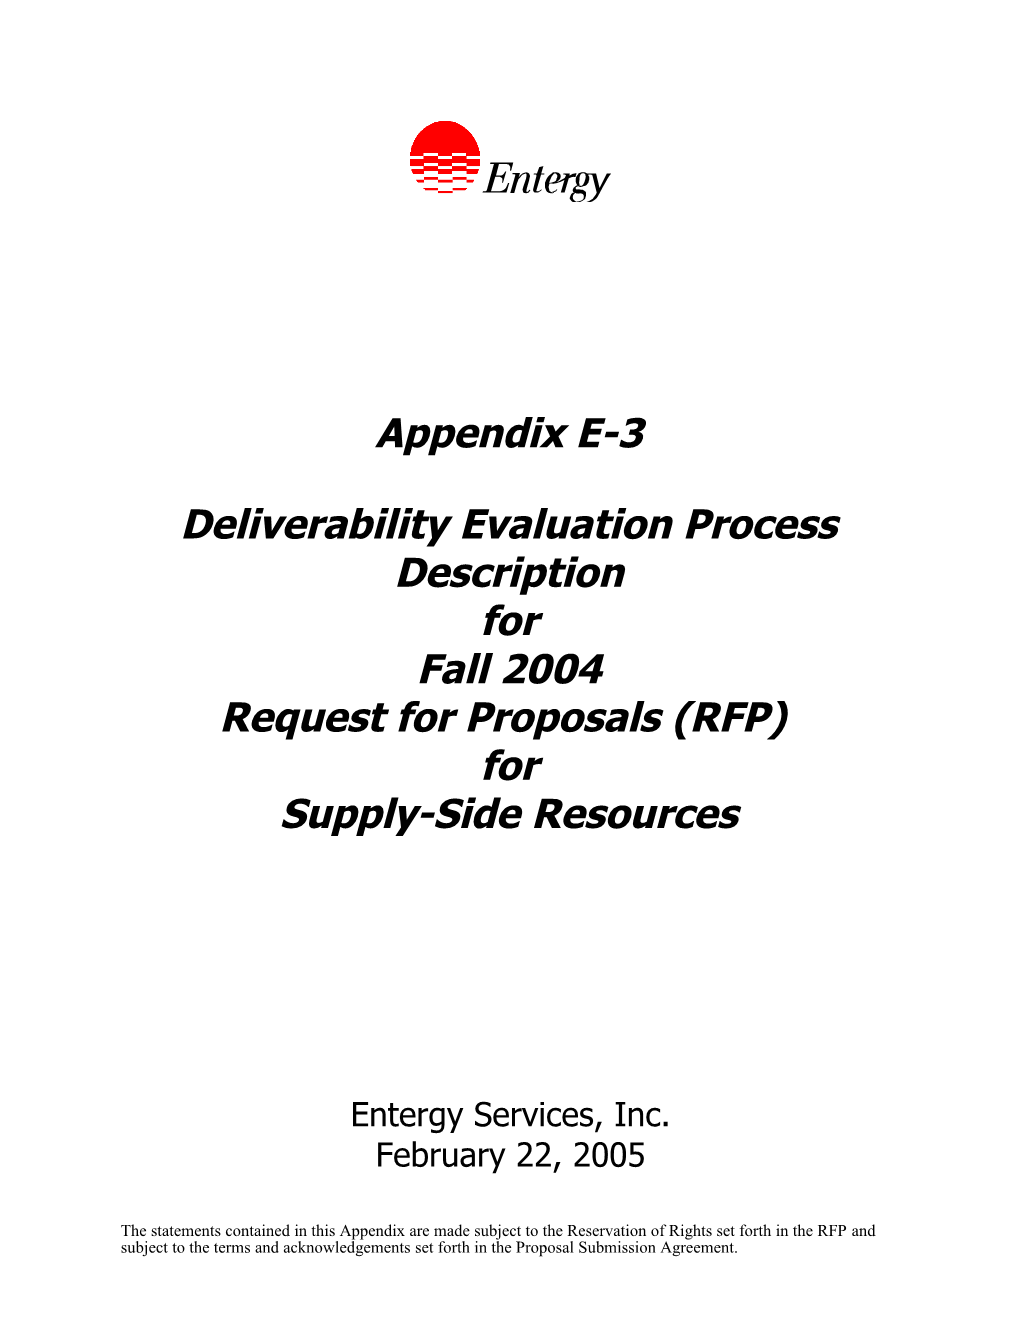 Transmission Deliverability Evaluation for Fall 2004 RFP